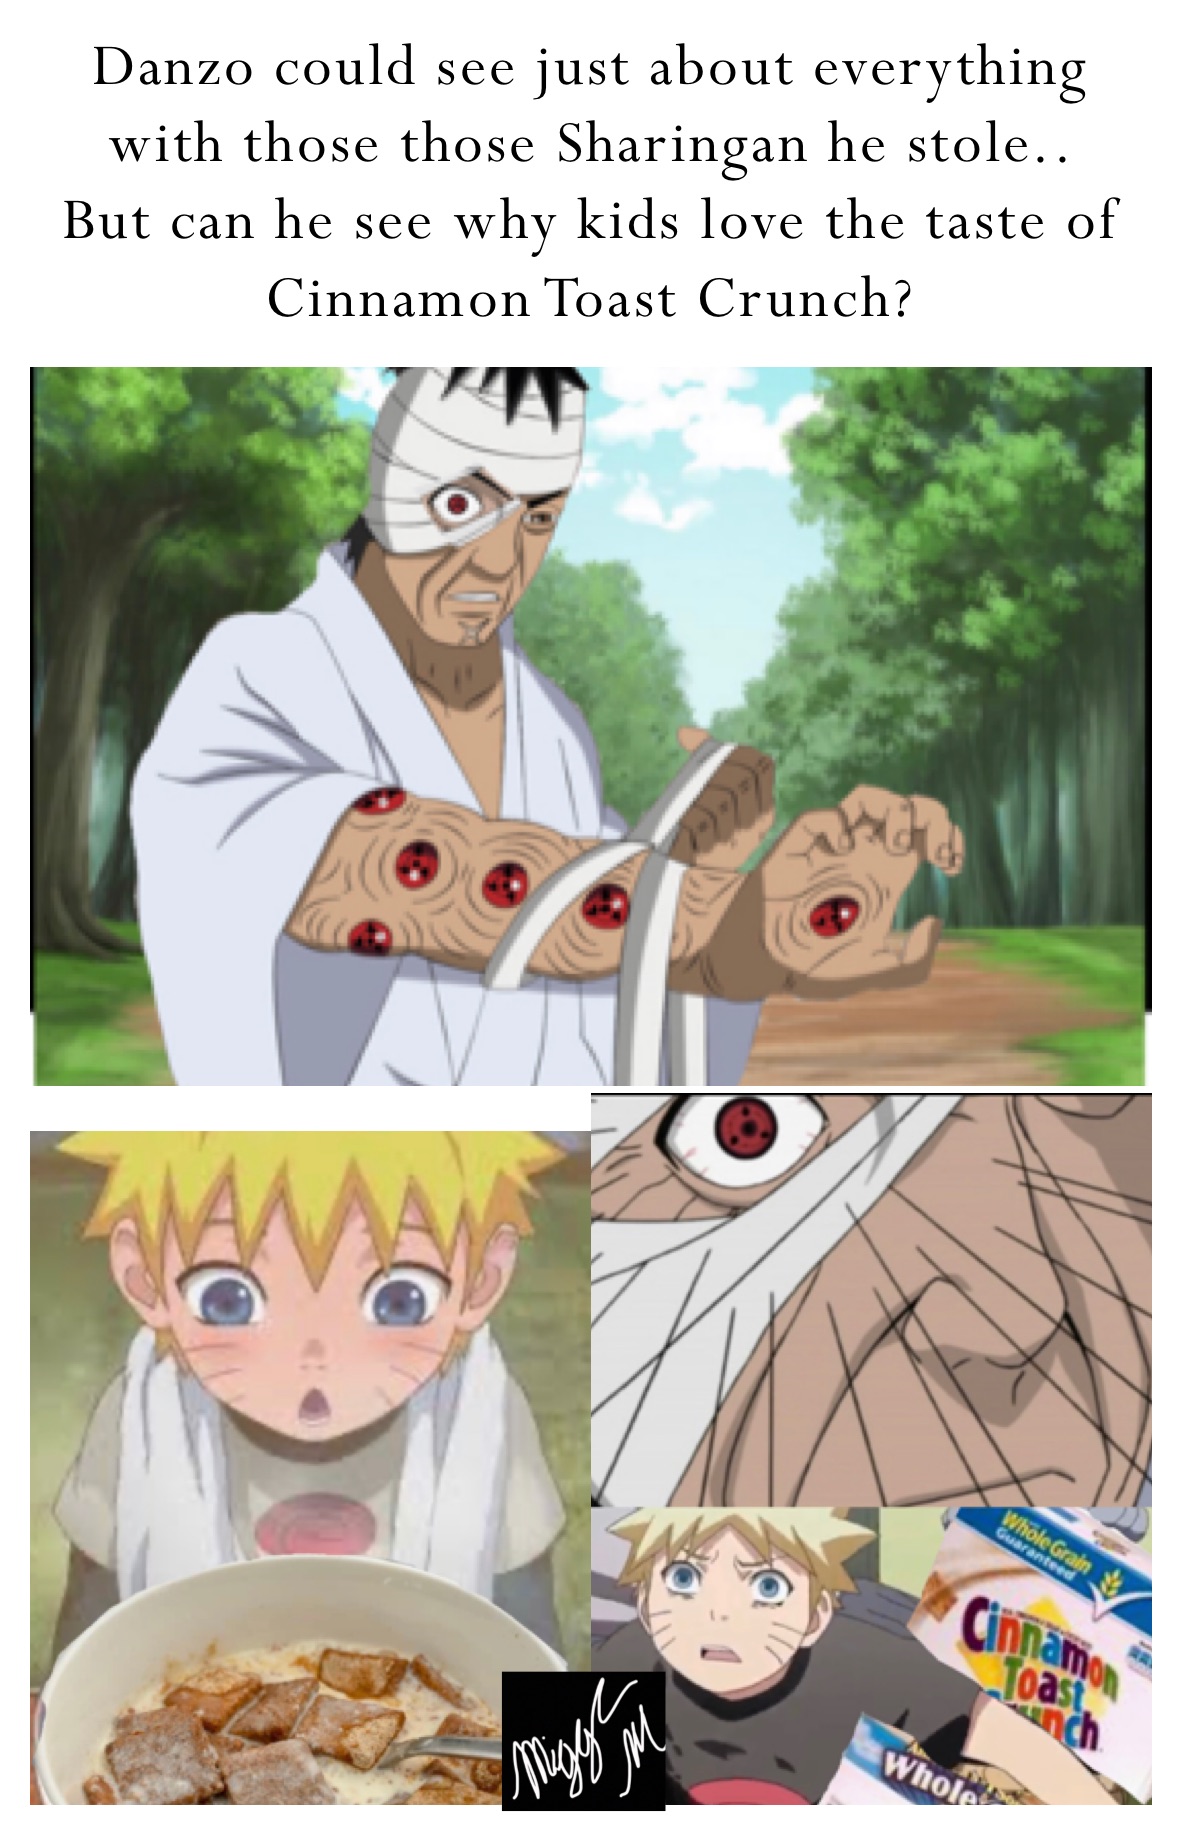 Danzo could see just about everything with those those Sharingan he stole.. 
But can he see why kids love the taste of Cinnamon Toast Crunch?